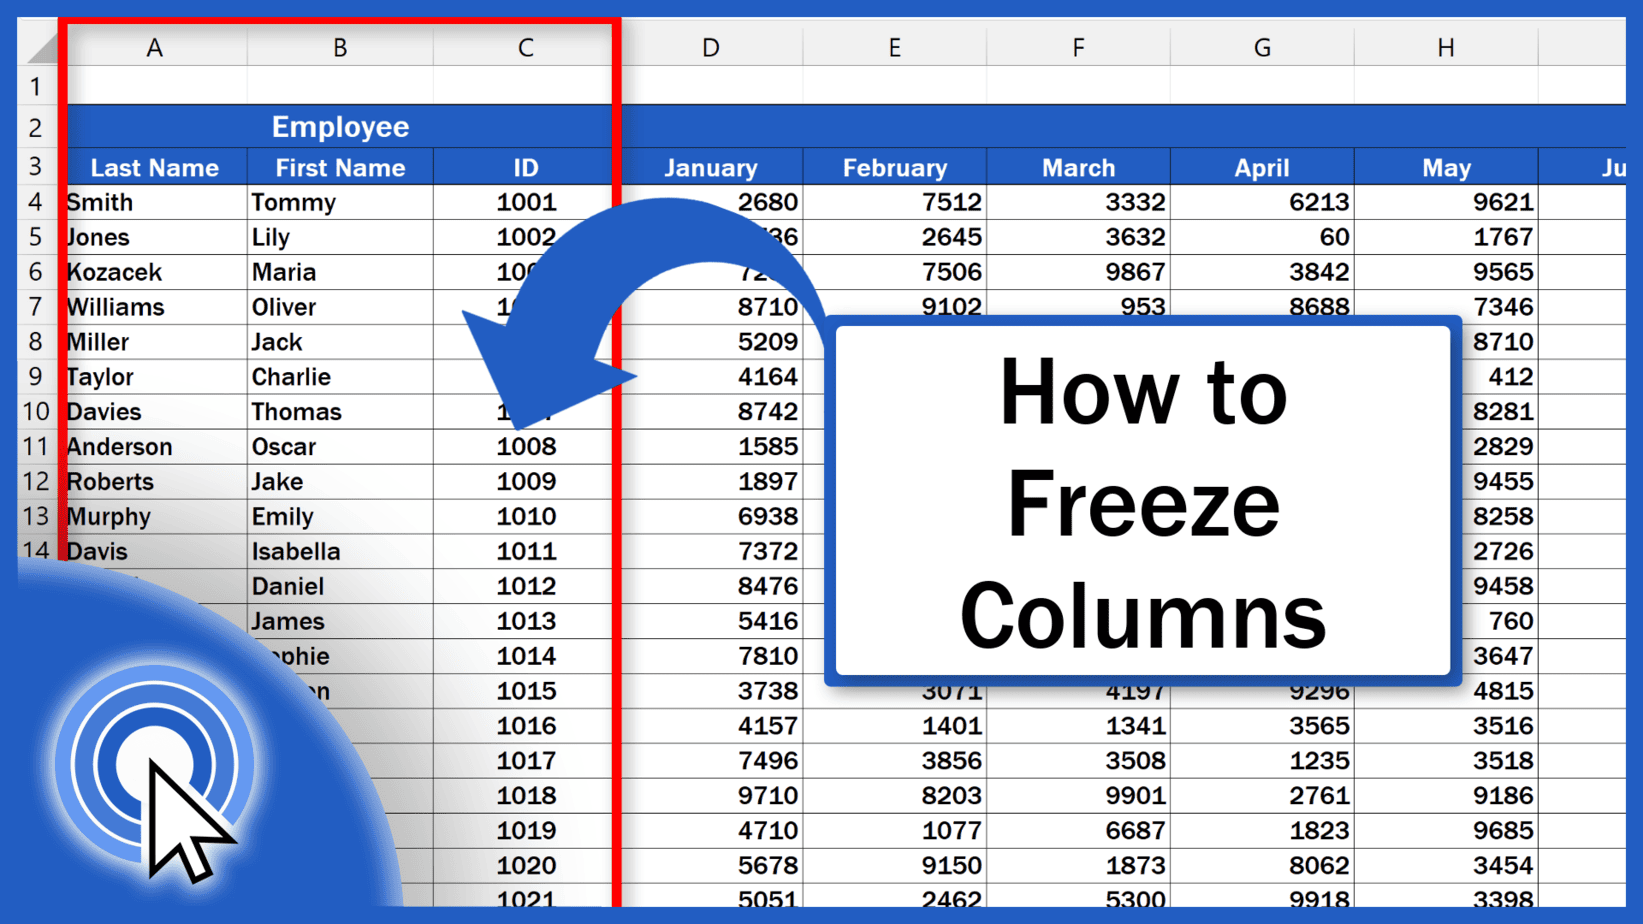 How to Freeze Columns in Excel